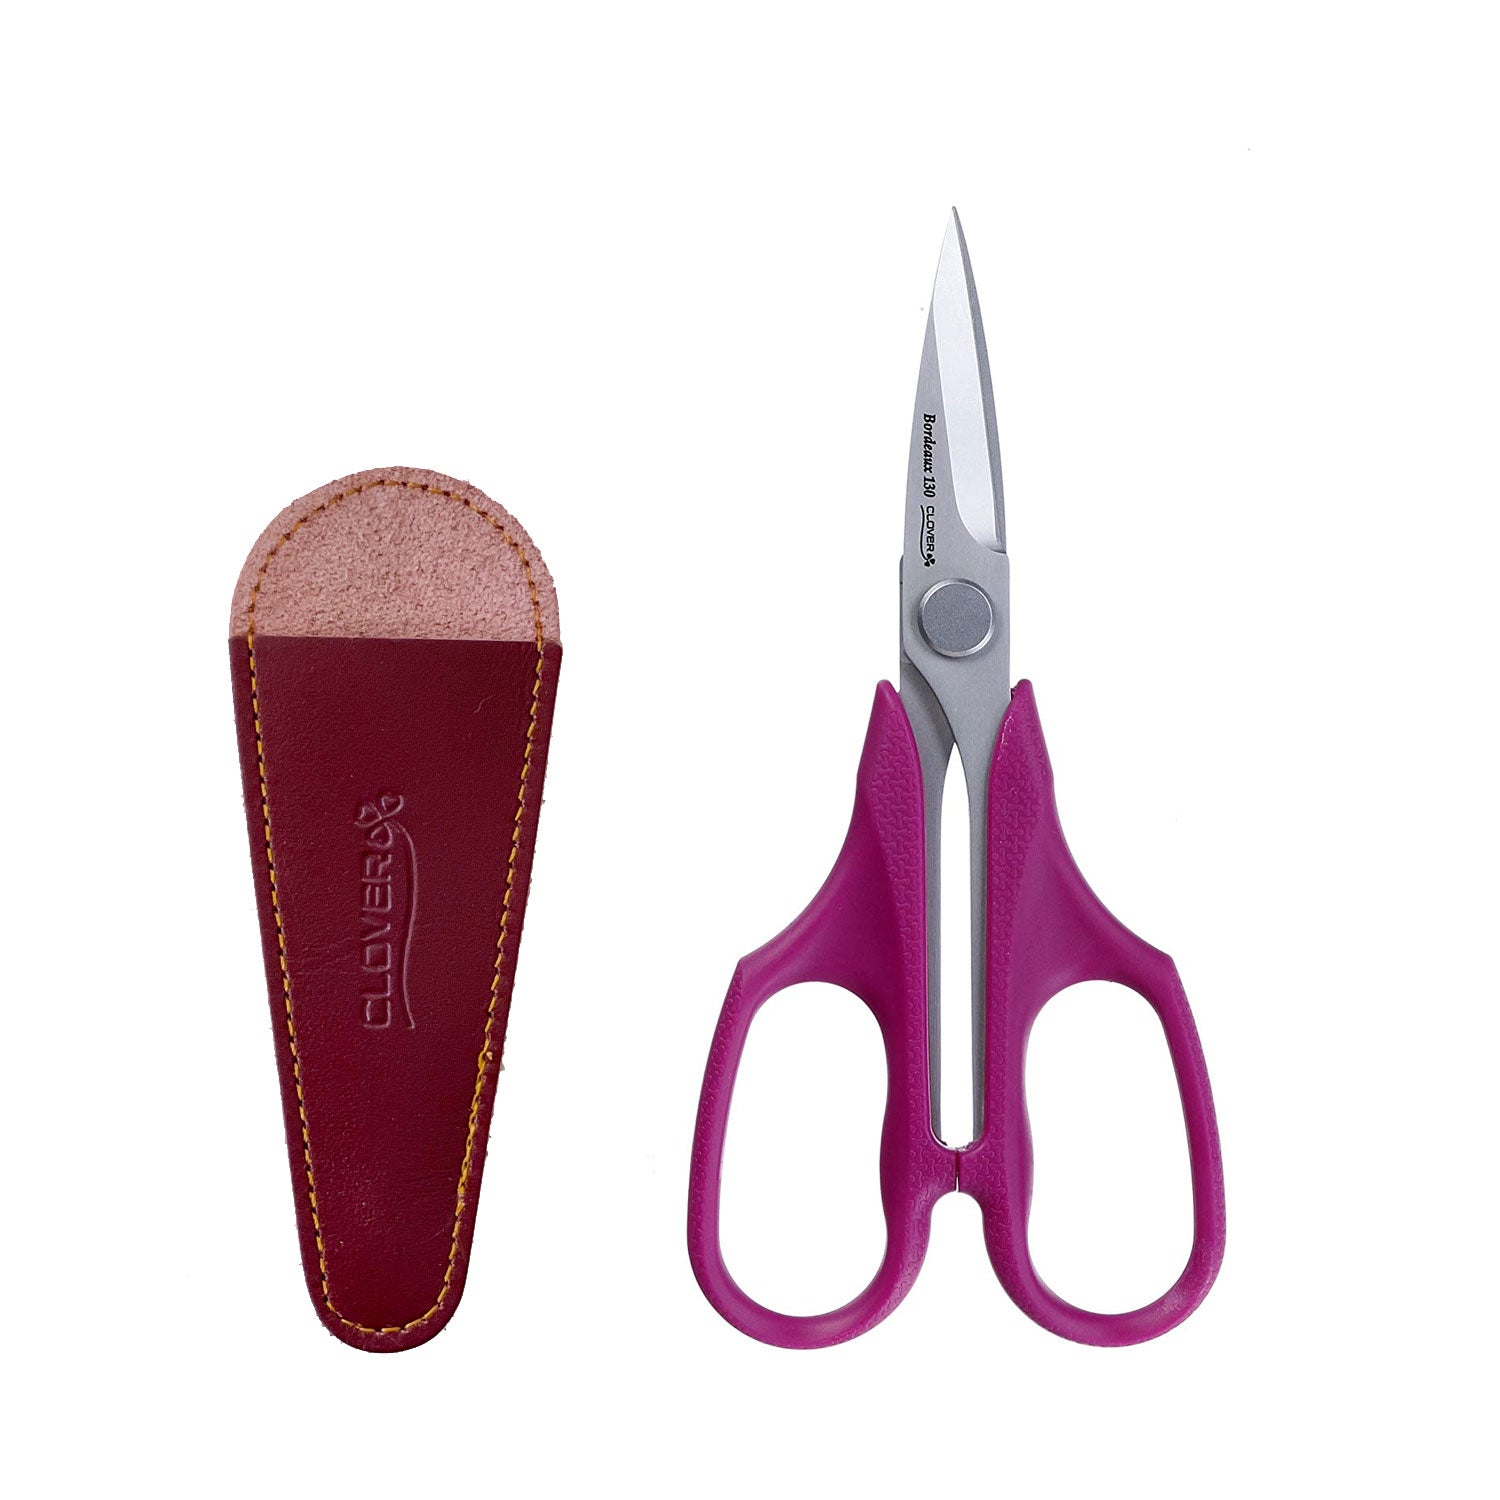 Clover Patchwork 5-1/2-Inch Small Scissors